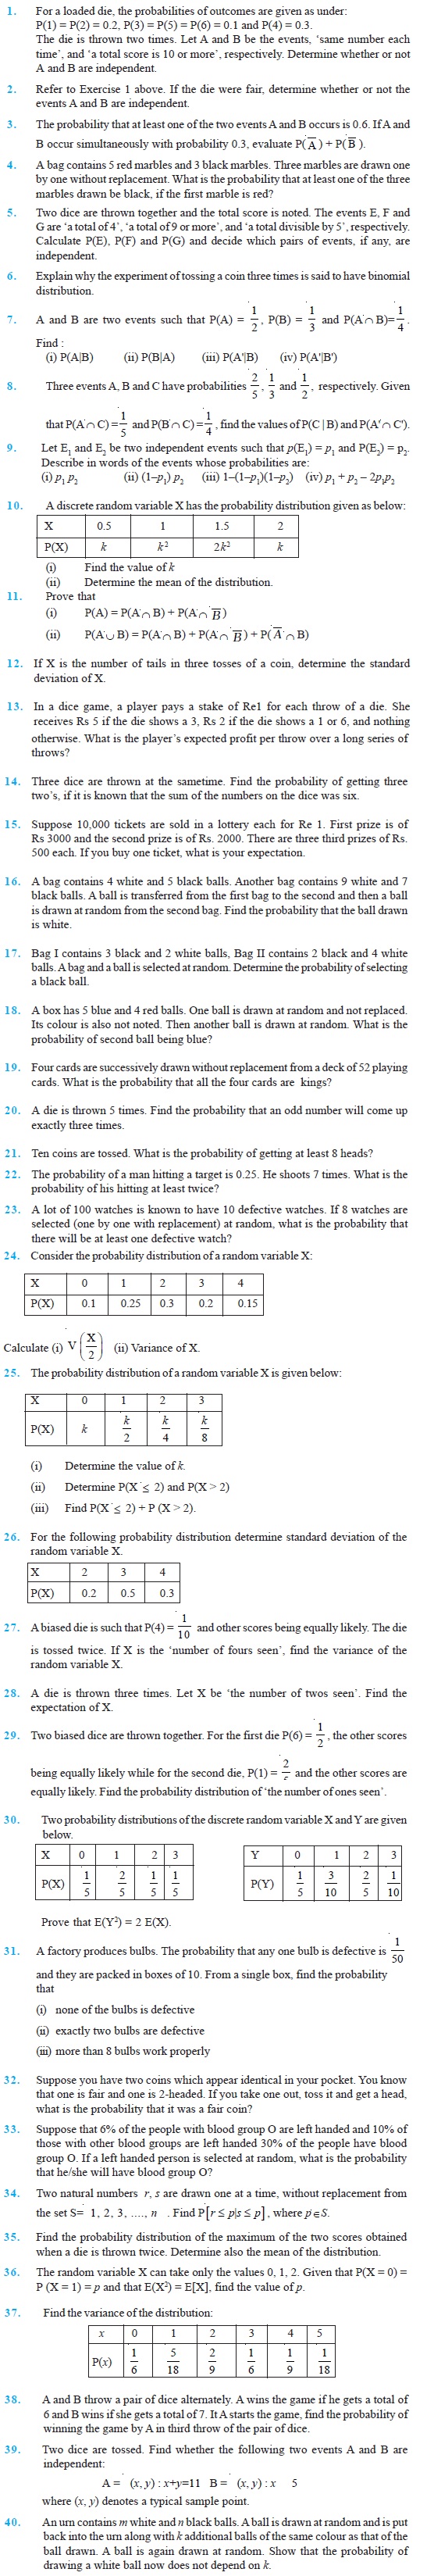 Class 12 Important Questions for Maths - Probability